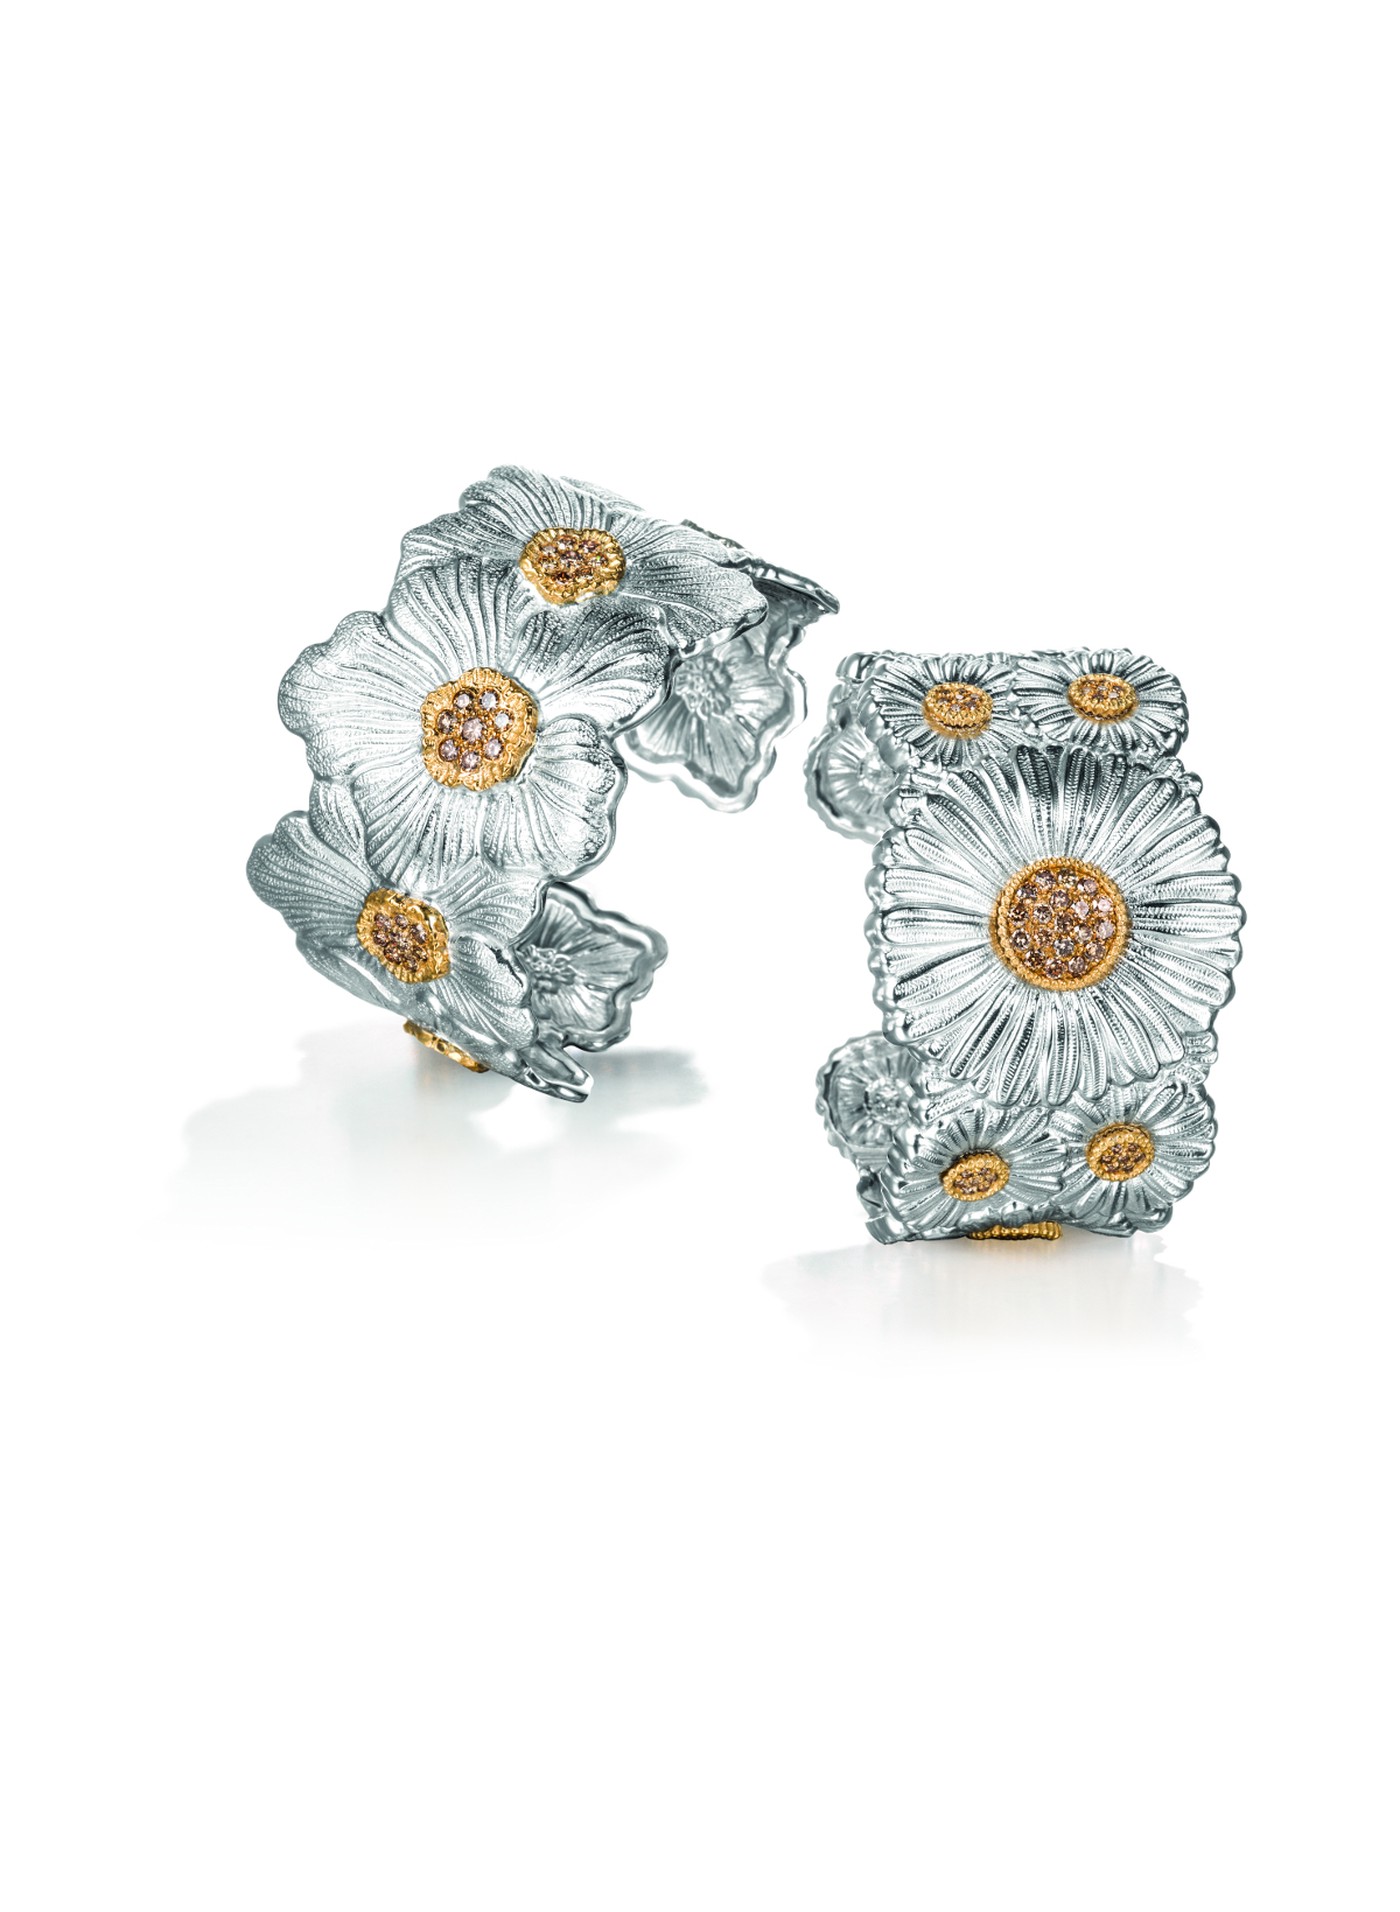 Blossoms Daisy and Gardenia bracelets in silver with vermeil and brown diamonds